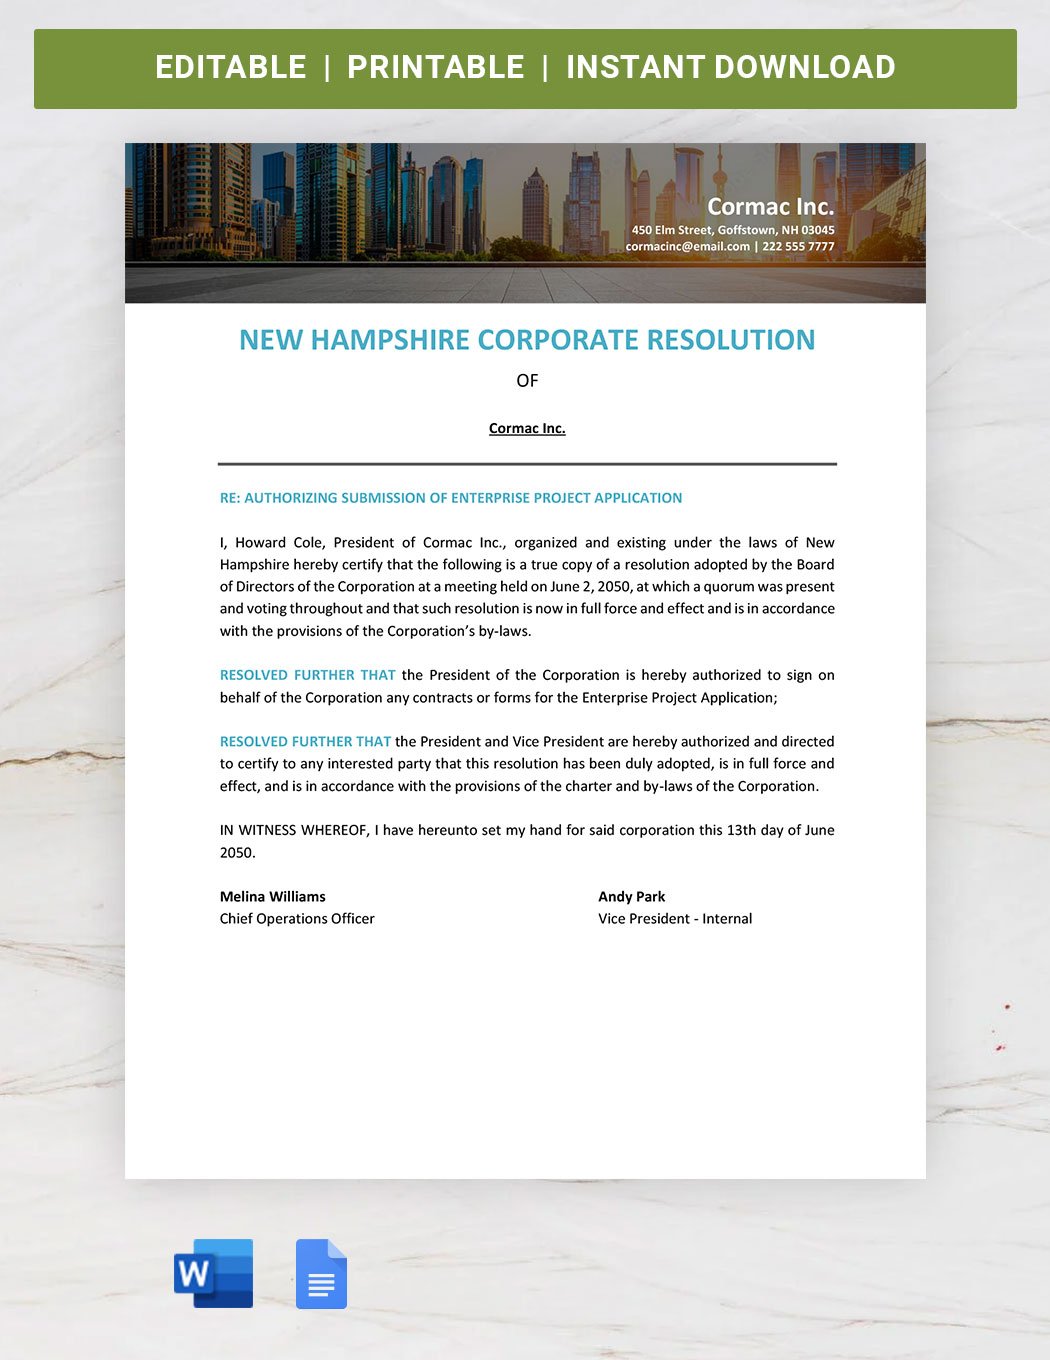 New Hampshire Corporate Resolution Template in Word, Google Docs